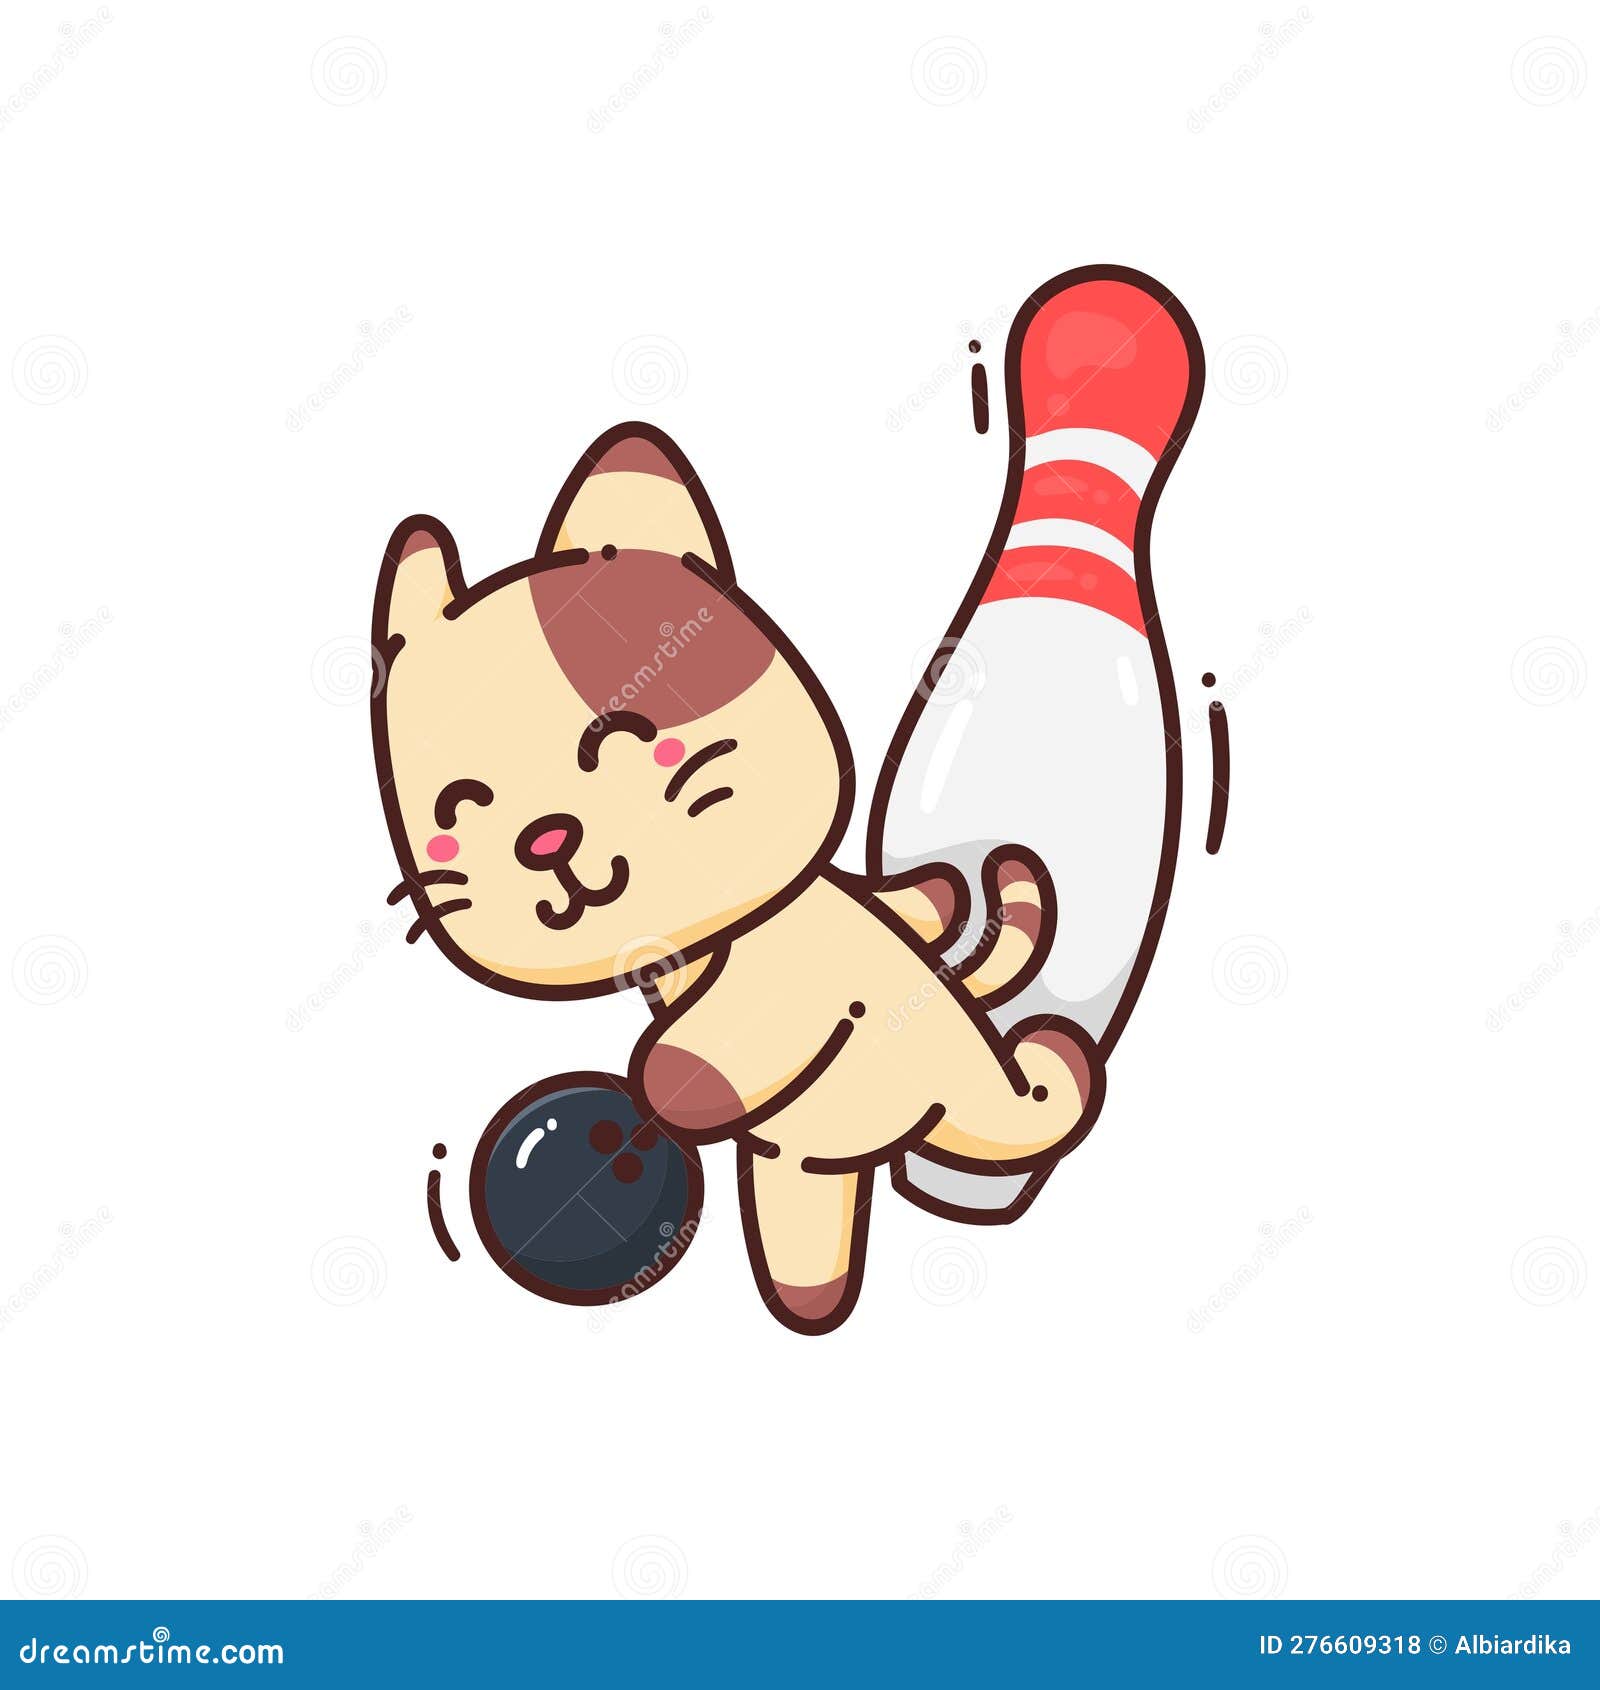 cat bowling online game